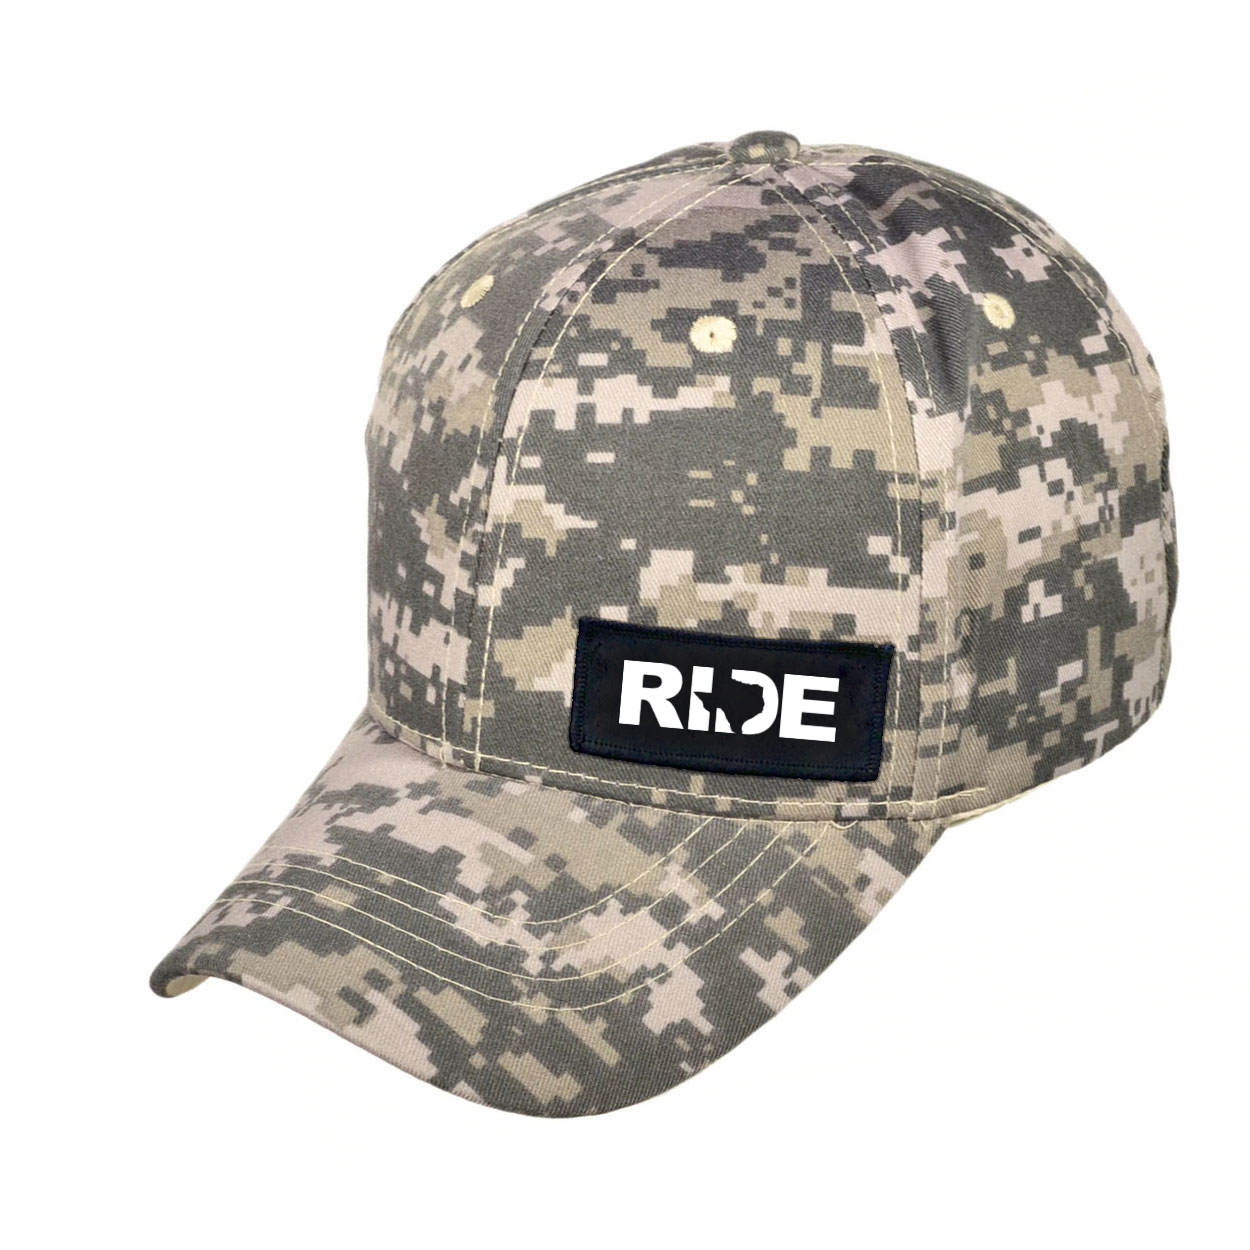 Ride Texas Night Out Woven Patch Velcro Trucker Hat Digital Camo